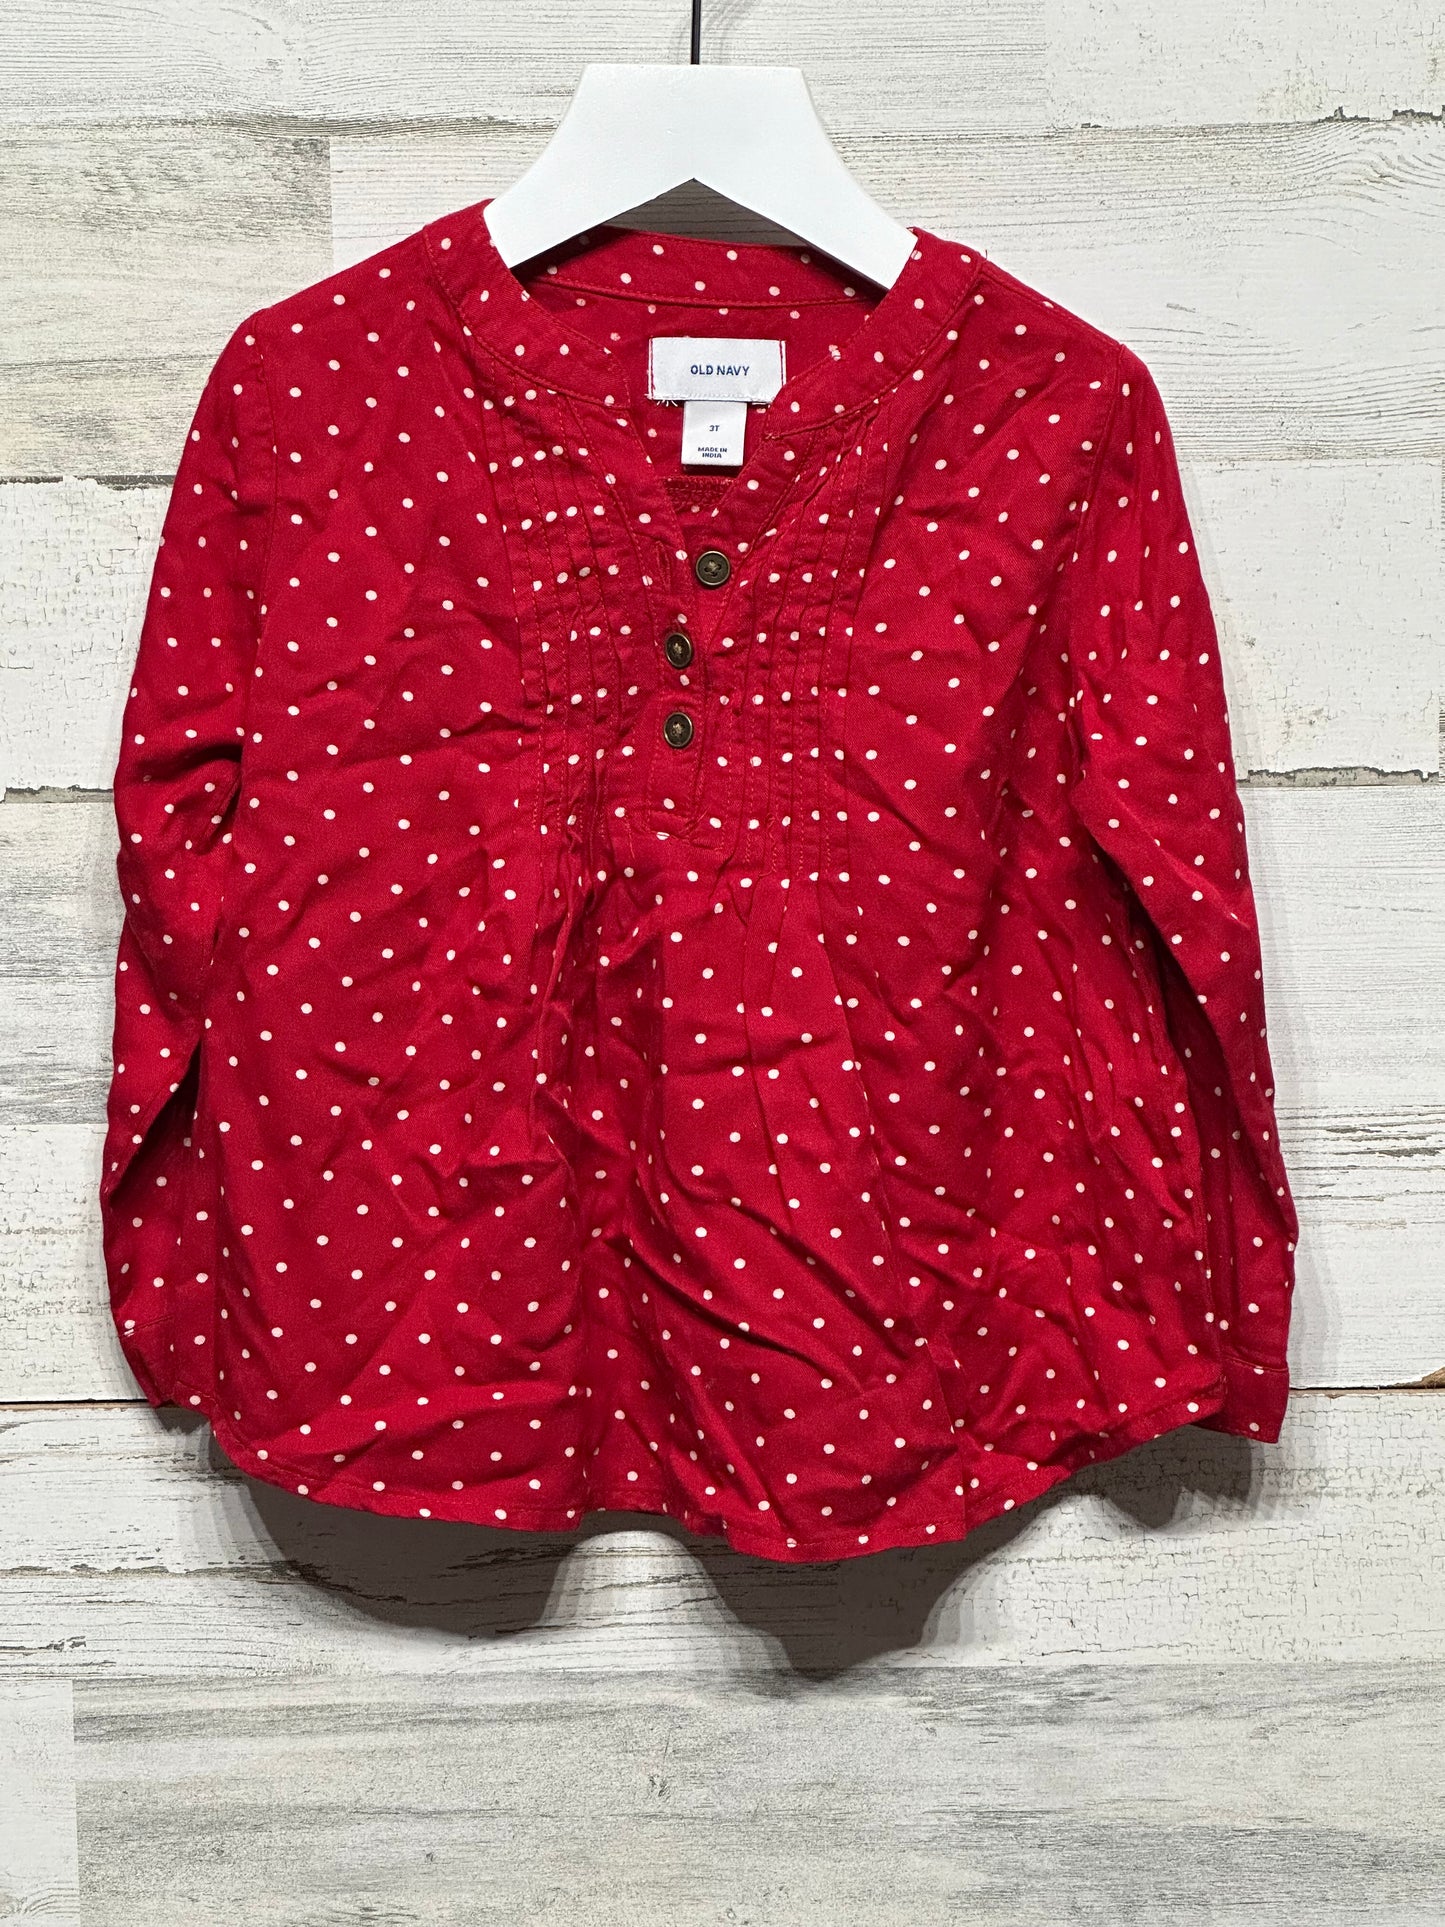 Girls Size 3t Old Navy Red Polka Dot Tunic - Good Used Condition